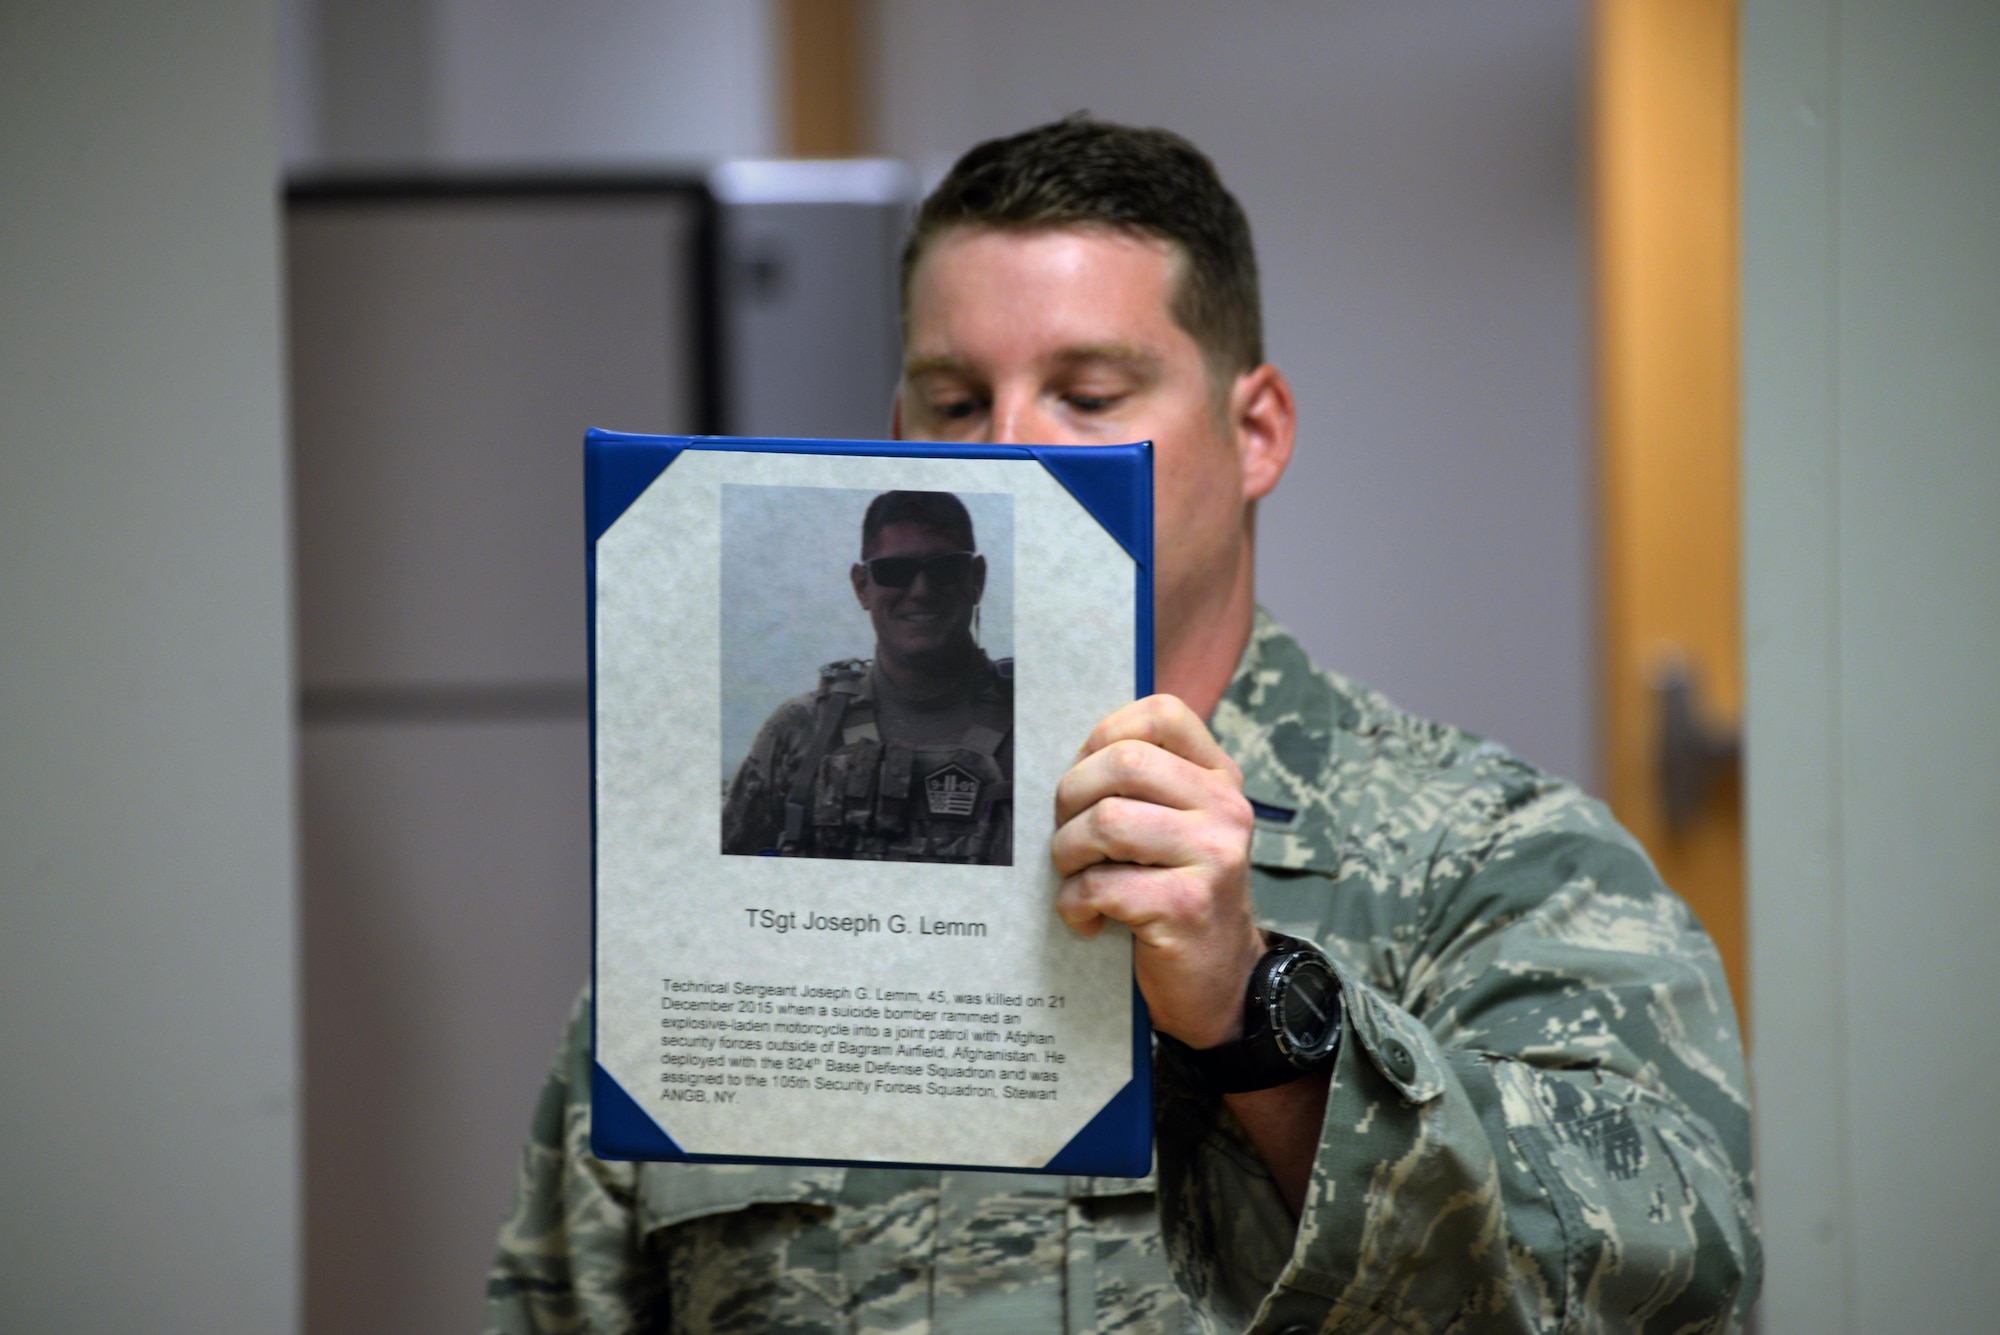 The 82nd Security Forces Squadron held a ceremony at Sheppard Air Force Base, Texas, May 17, 2017, which honored defenders who have made the ultimate sacrifice serving their country. 1st Lt. Bryan Duggan, 82nd SFS operations officer, holds up a picture of Tech. Sgt. Joseph Lemm, a fellow defender who was killed on Dec. 21, 2015, by a suicide bomber. Lemm was assigned to the 105th SFS at Stewart Air National Guard Base, New York. (U.S. Air Force photo by Senior Airman Robert L. McIlrath)